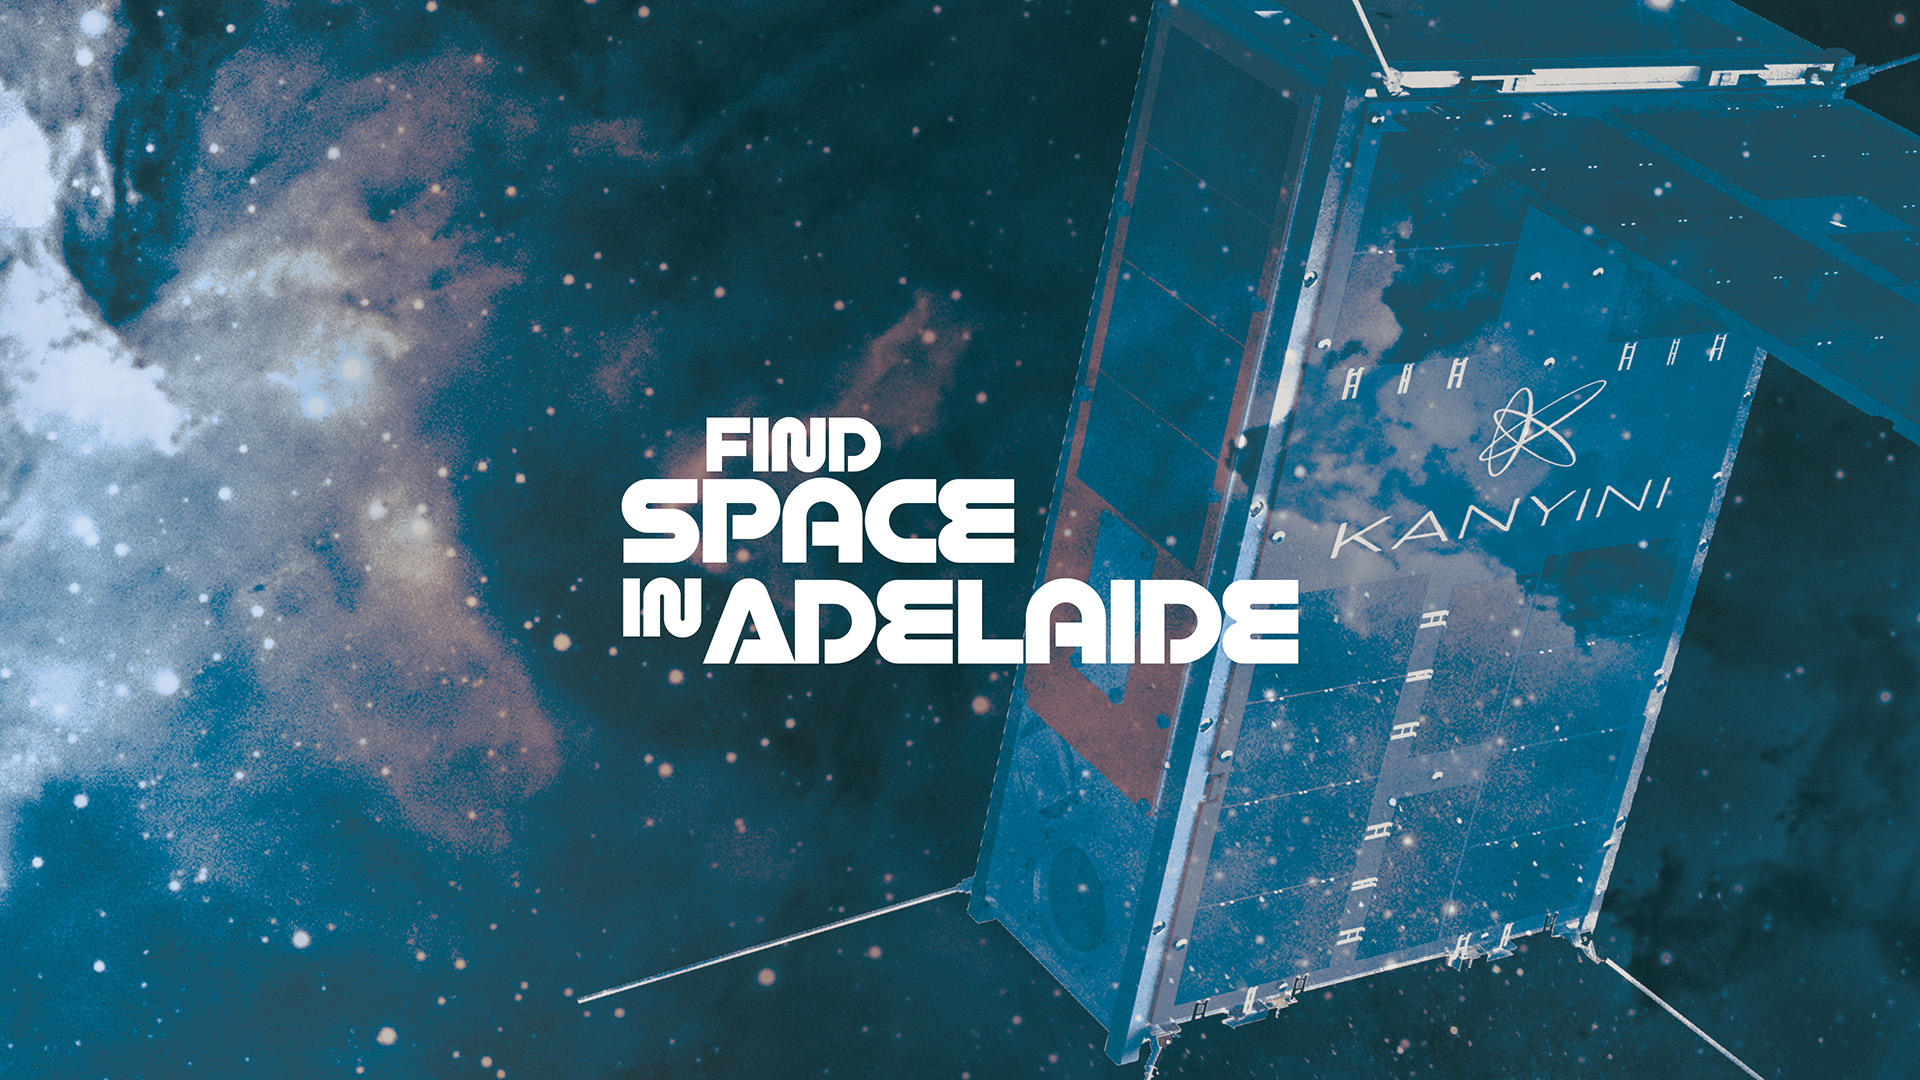 Find Space in Space written in white text on top of a blue space background with a satellite in right corner